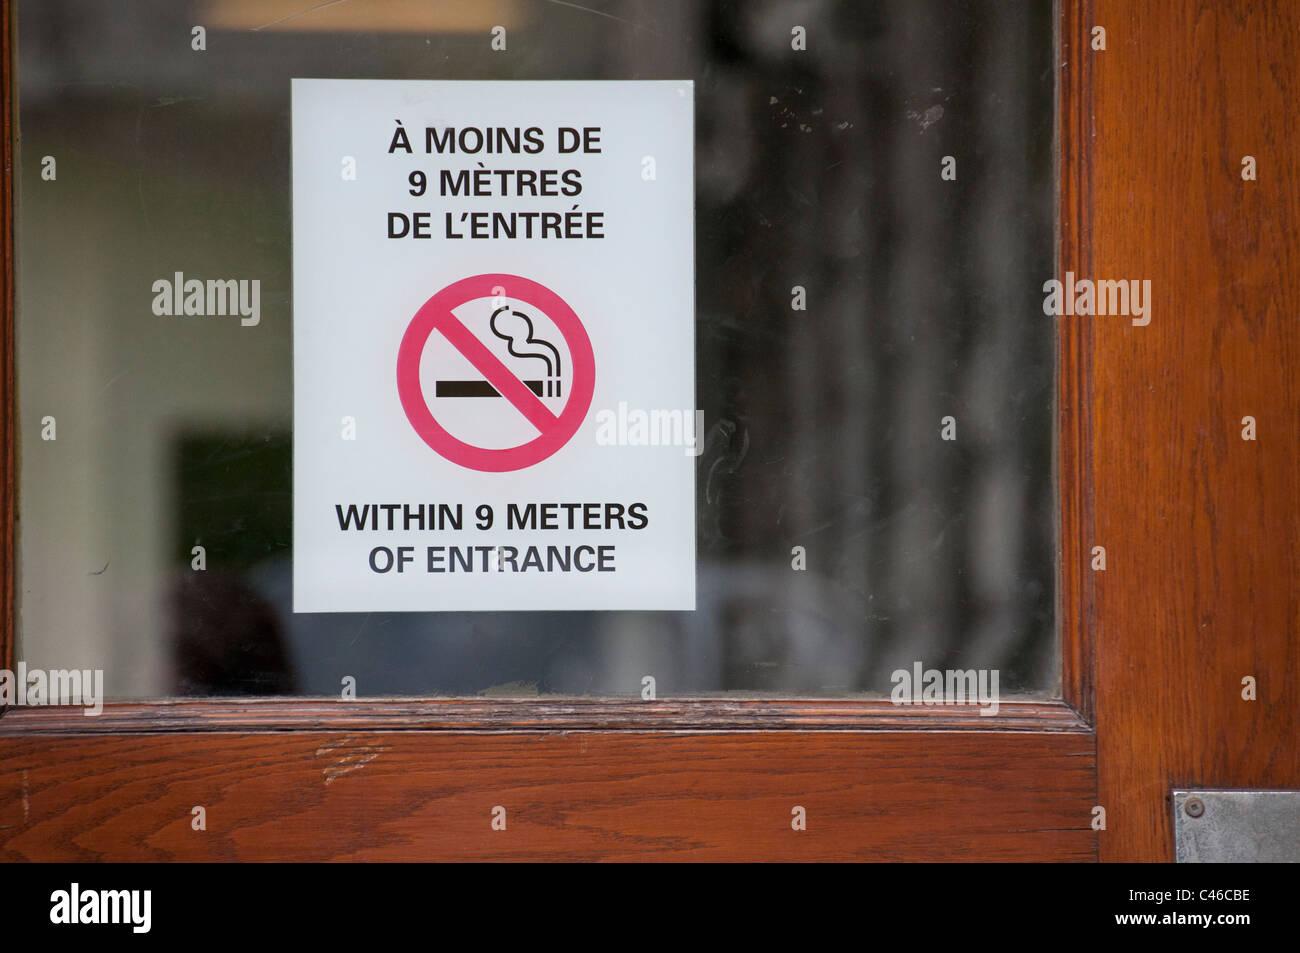 Bilingual sign : french and english Montreal Canada Stock Photo